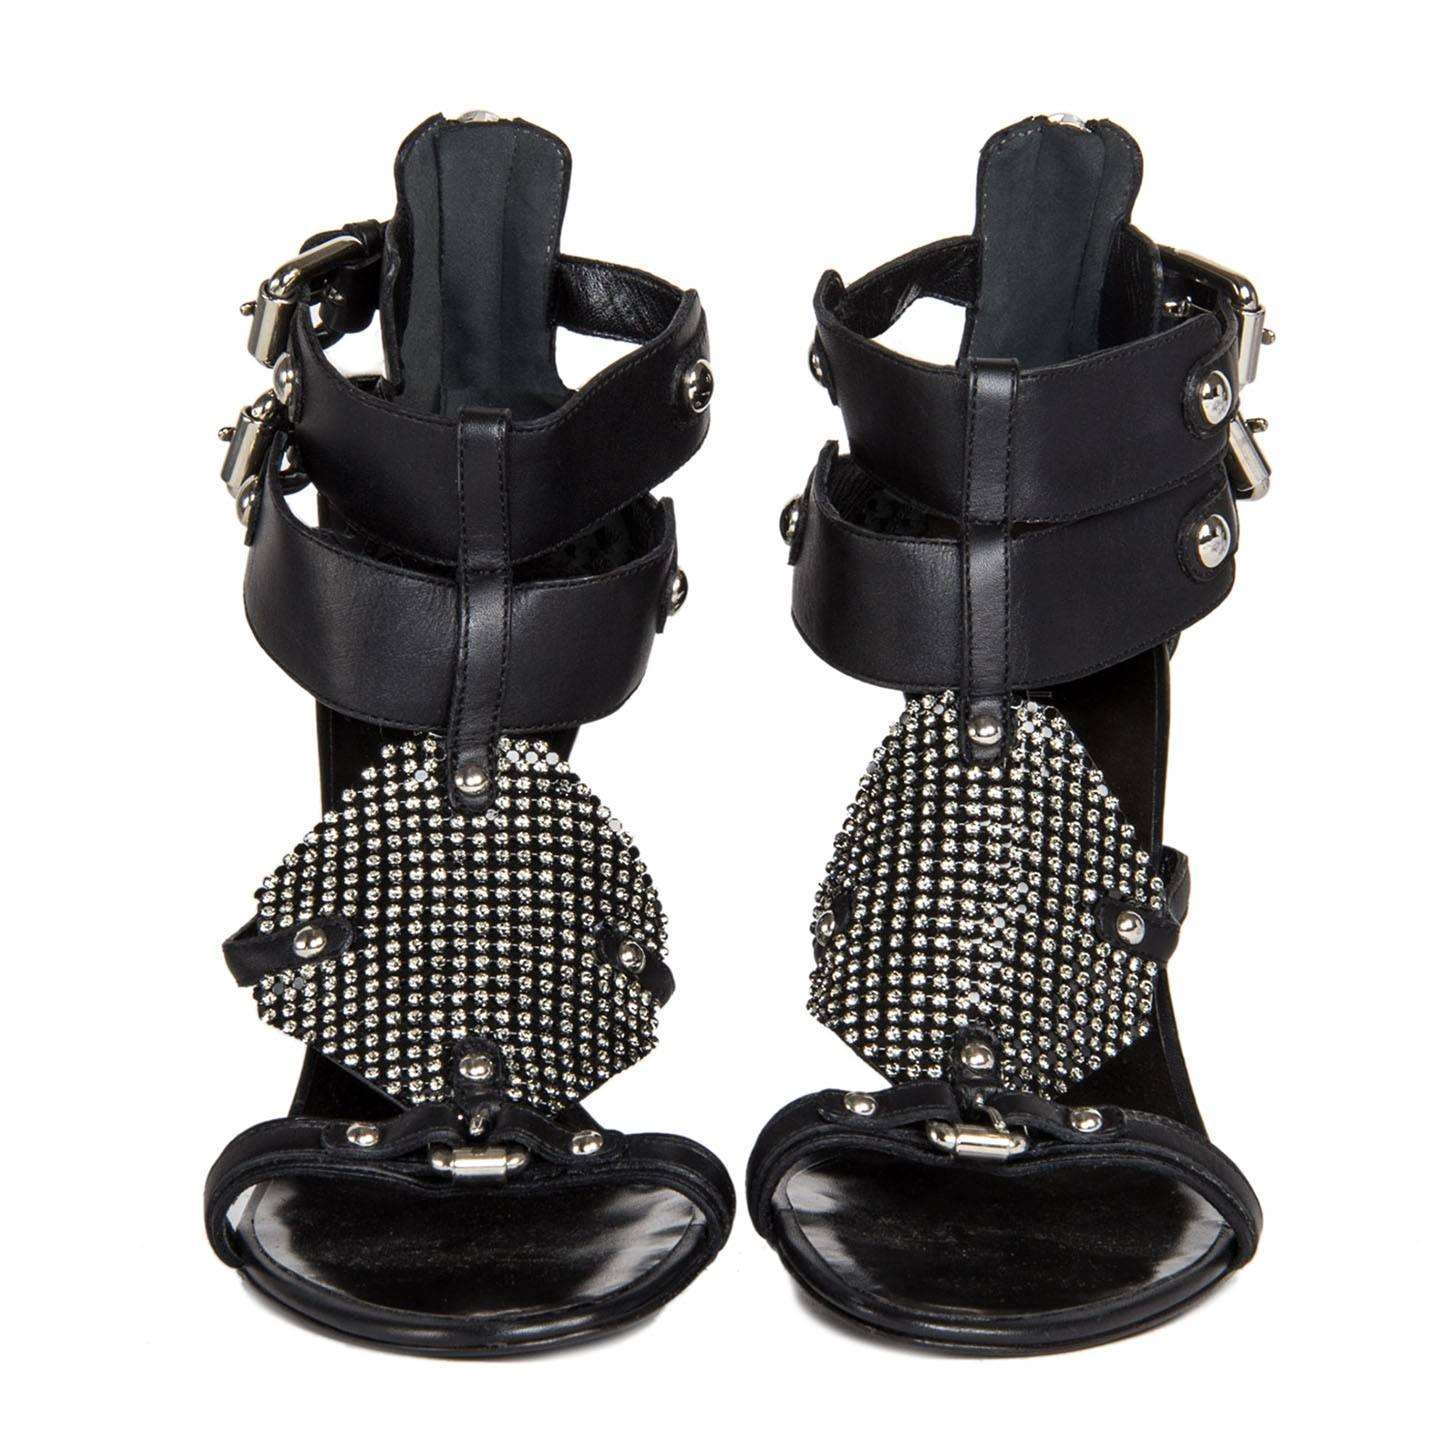 Balmain Black & Rhinestoned Sandals In New Condition For Sale In Brooklyn, NY